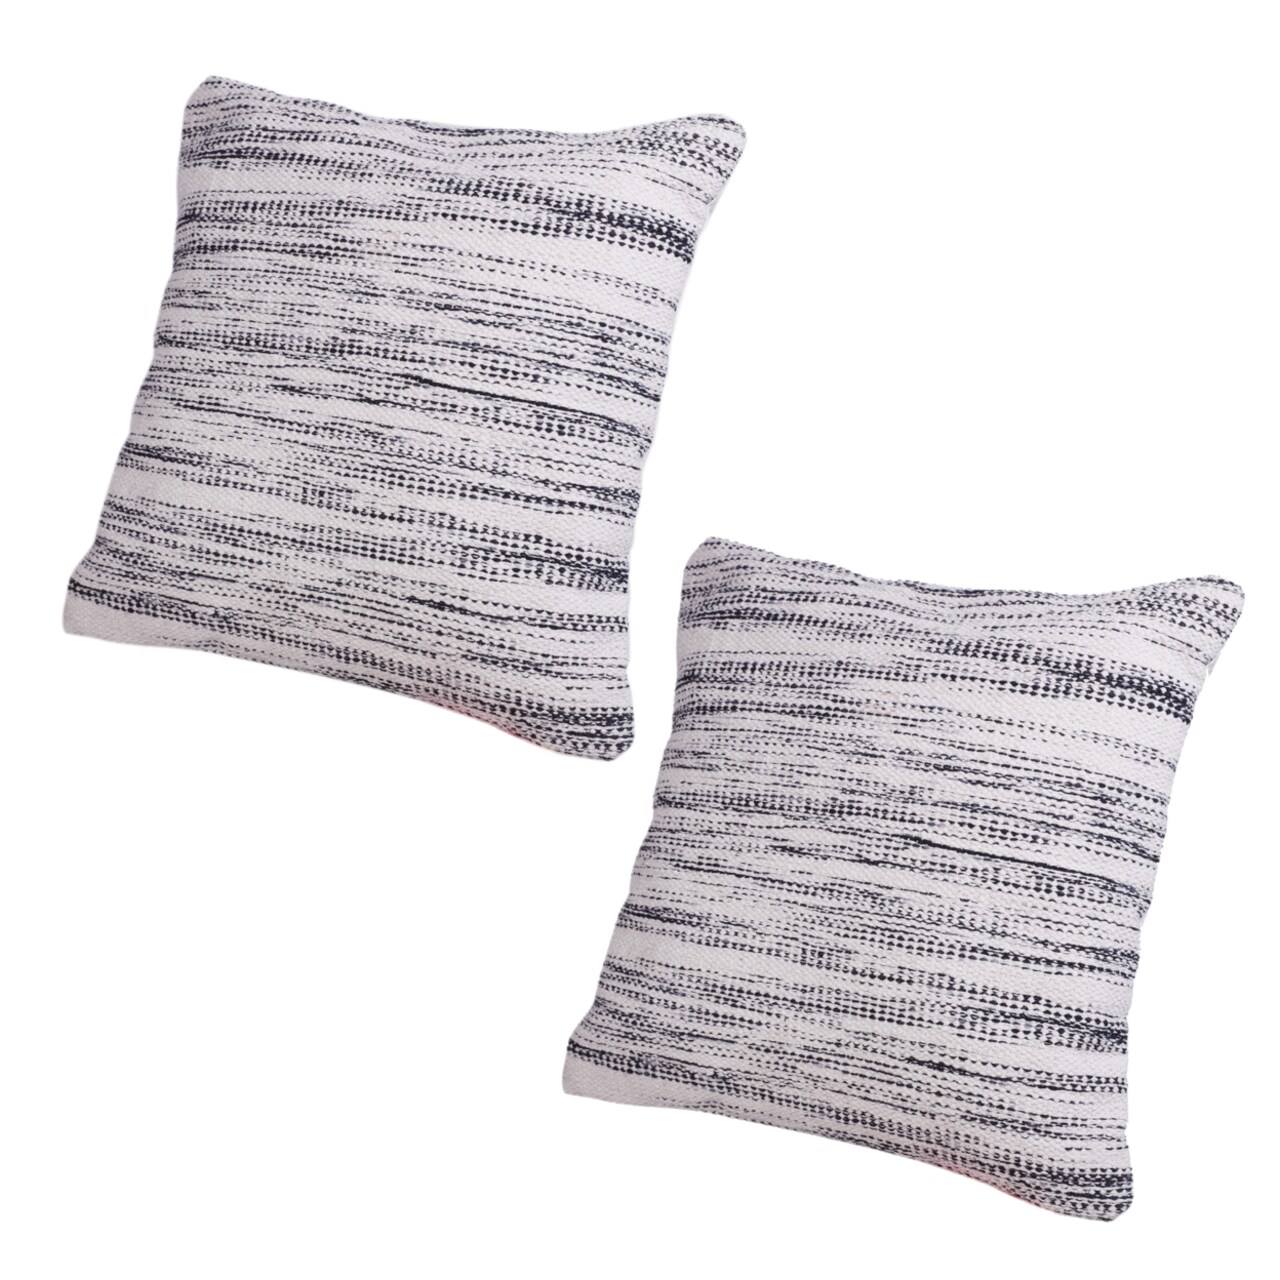 Saltoro Sherpi 18 x 18 Handcrafted Cotton Accent Throw Pillows, Woven Lined  Design, Set of 2, White, Gray, Black